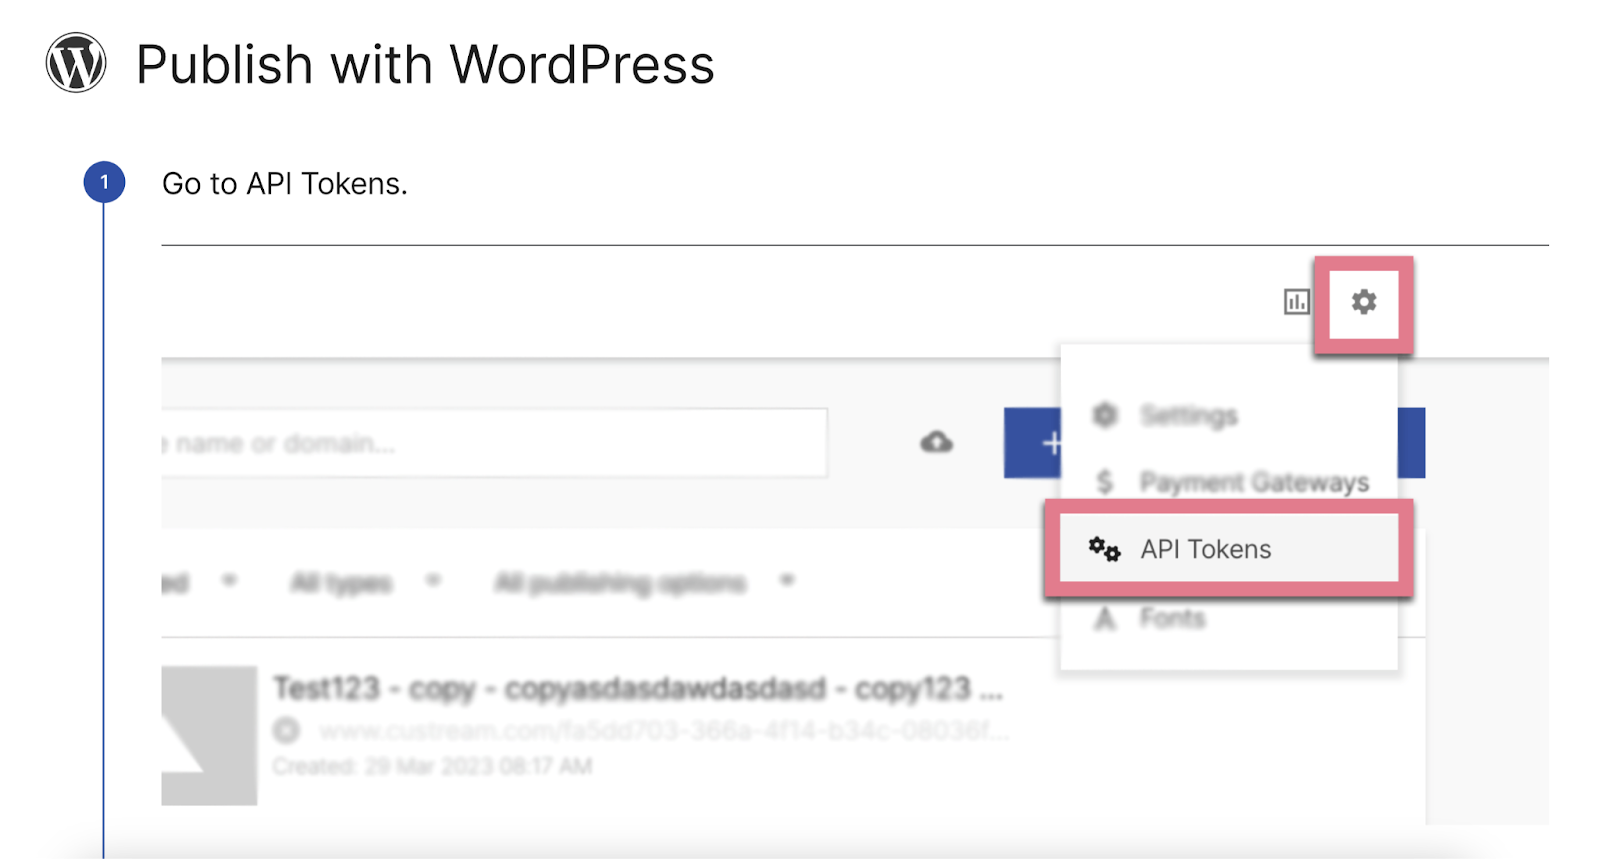 "Publish with WordPress" configuration page